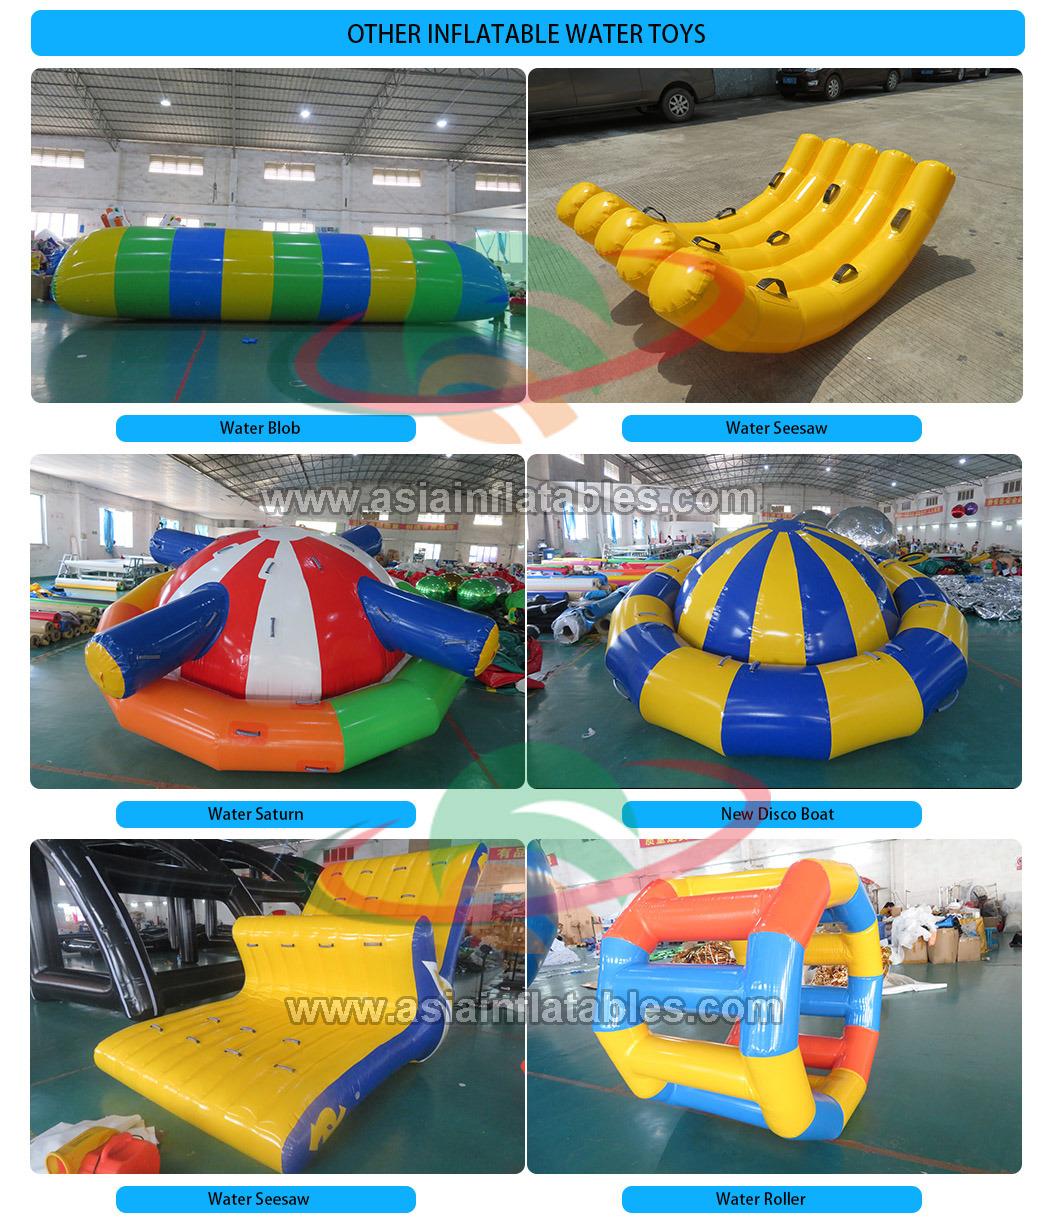 Customized Inflatable Floating Island for Swimming Pool